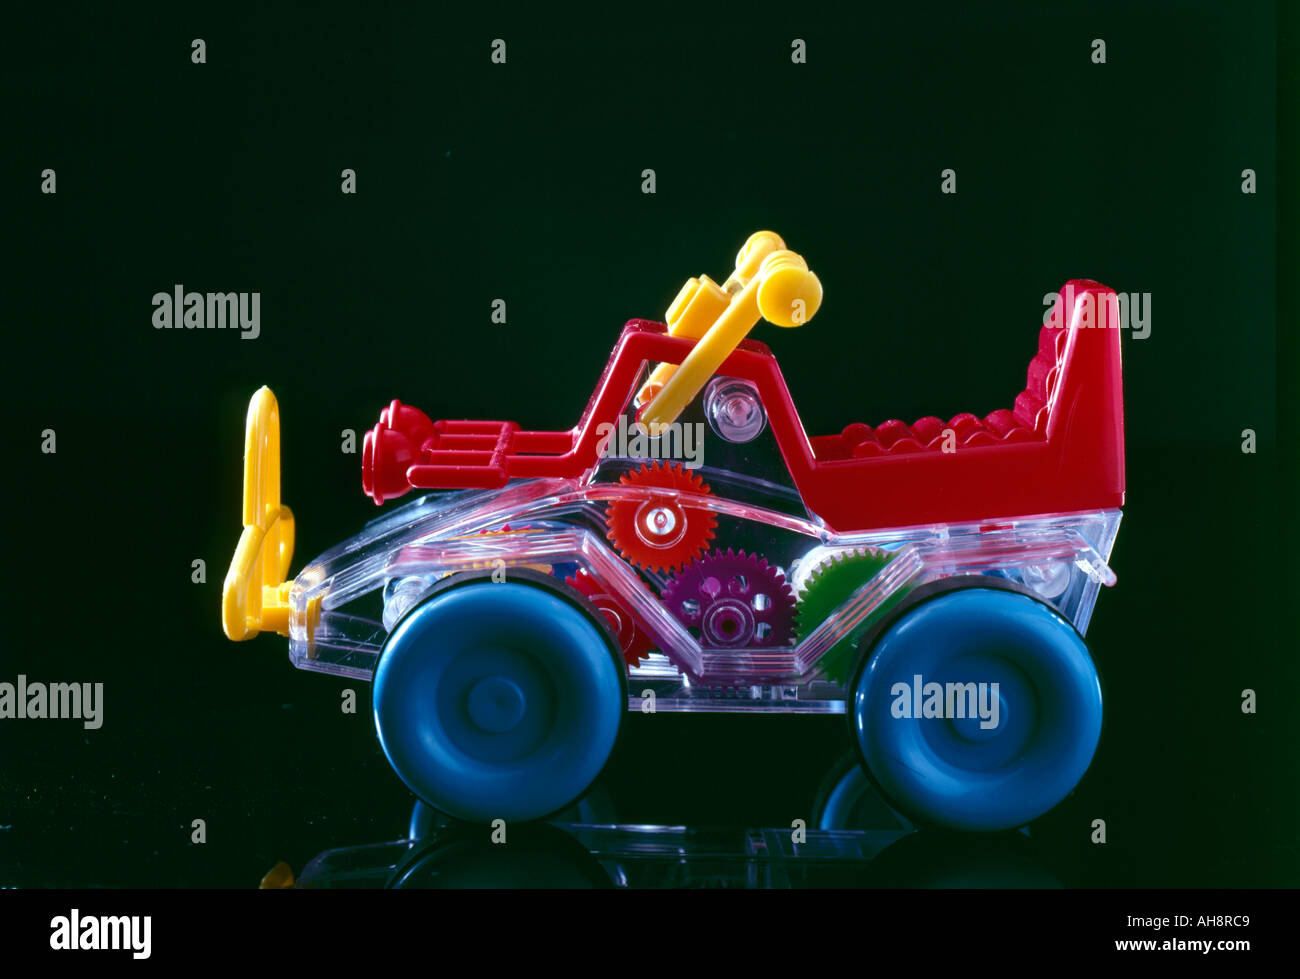 AAD71613 Toy car automobile auto childs joy show piece made of colourful plastic blue green yellow red colours black back ground Stock Photo